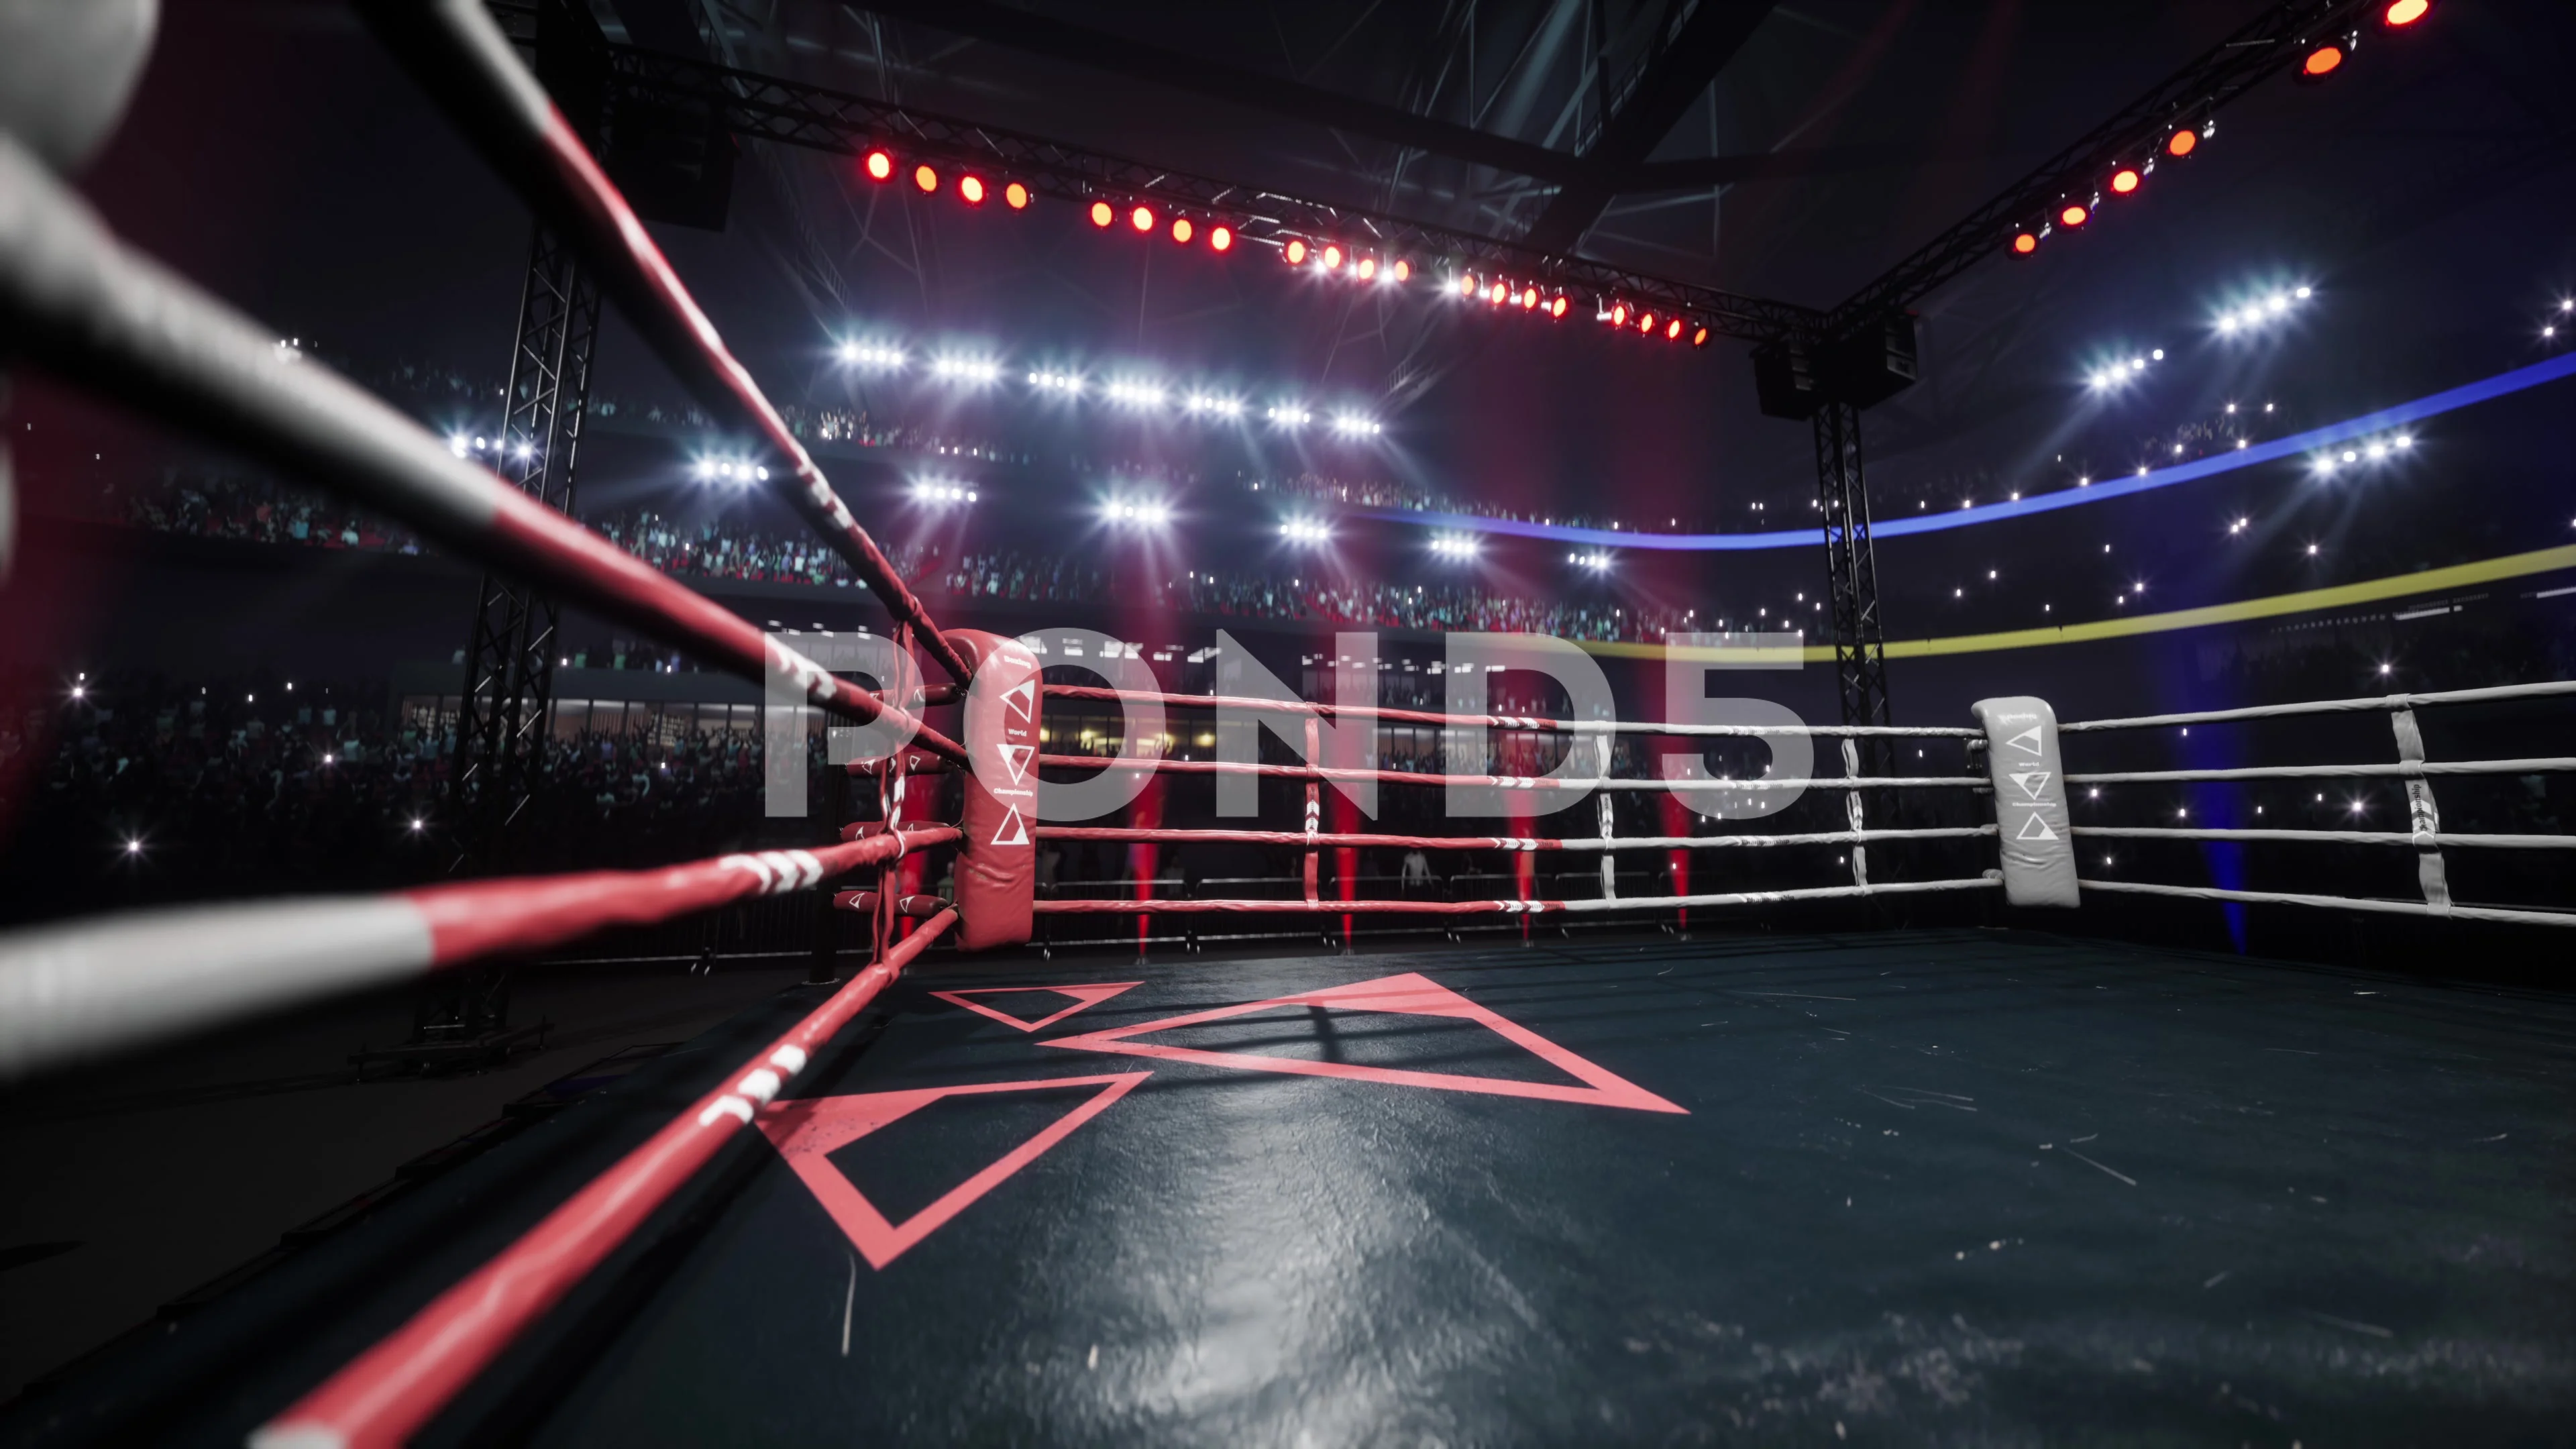 The scene of a boxing match, just the boxing ring, no fighters, no people  in the ring, an octagon-type boxing ring with the audience around - SeaArt  AI